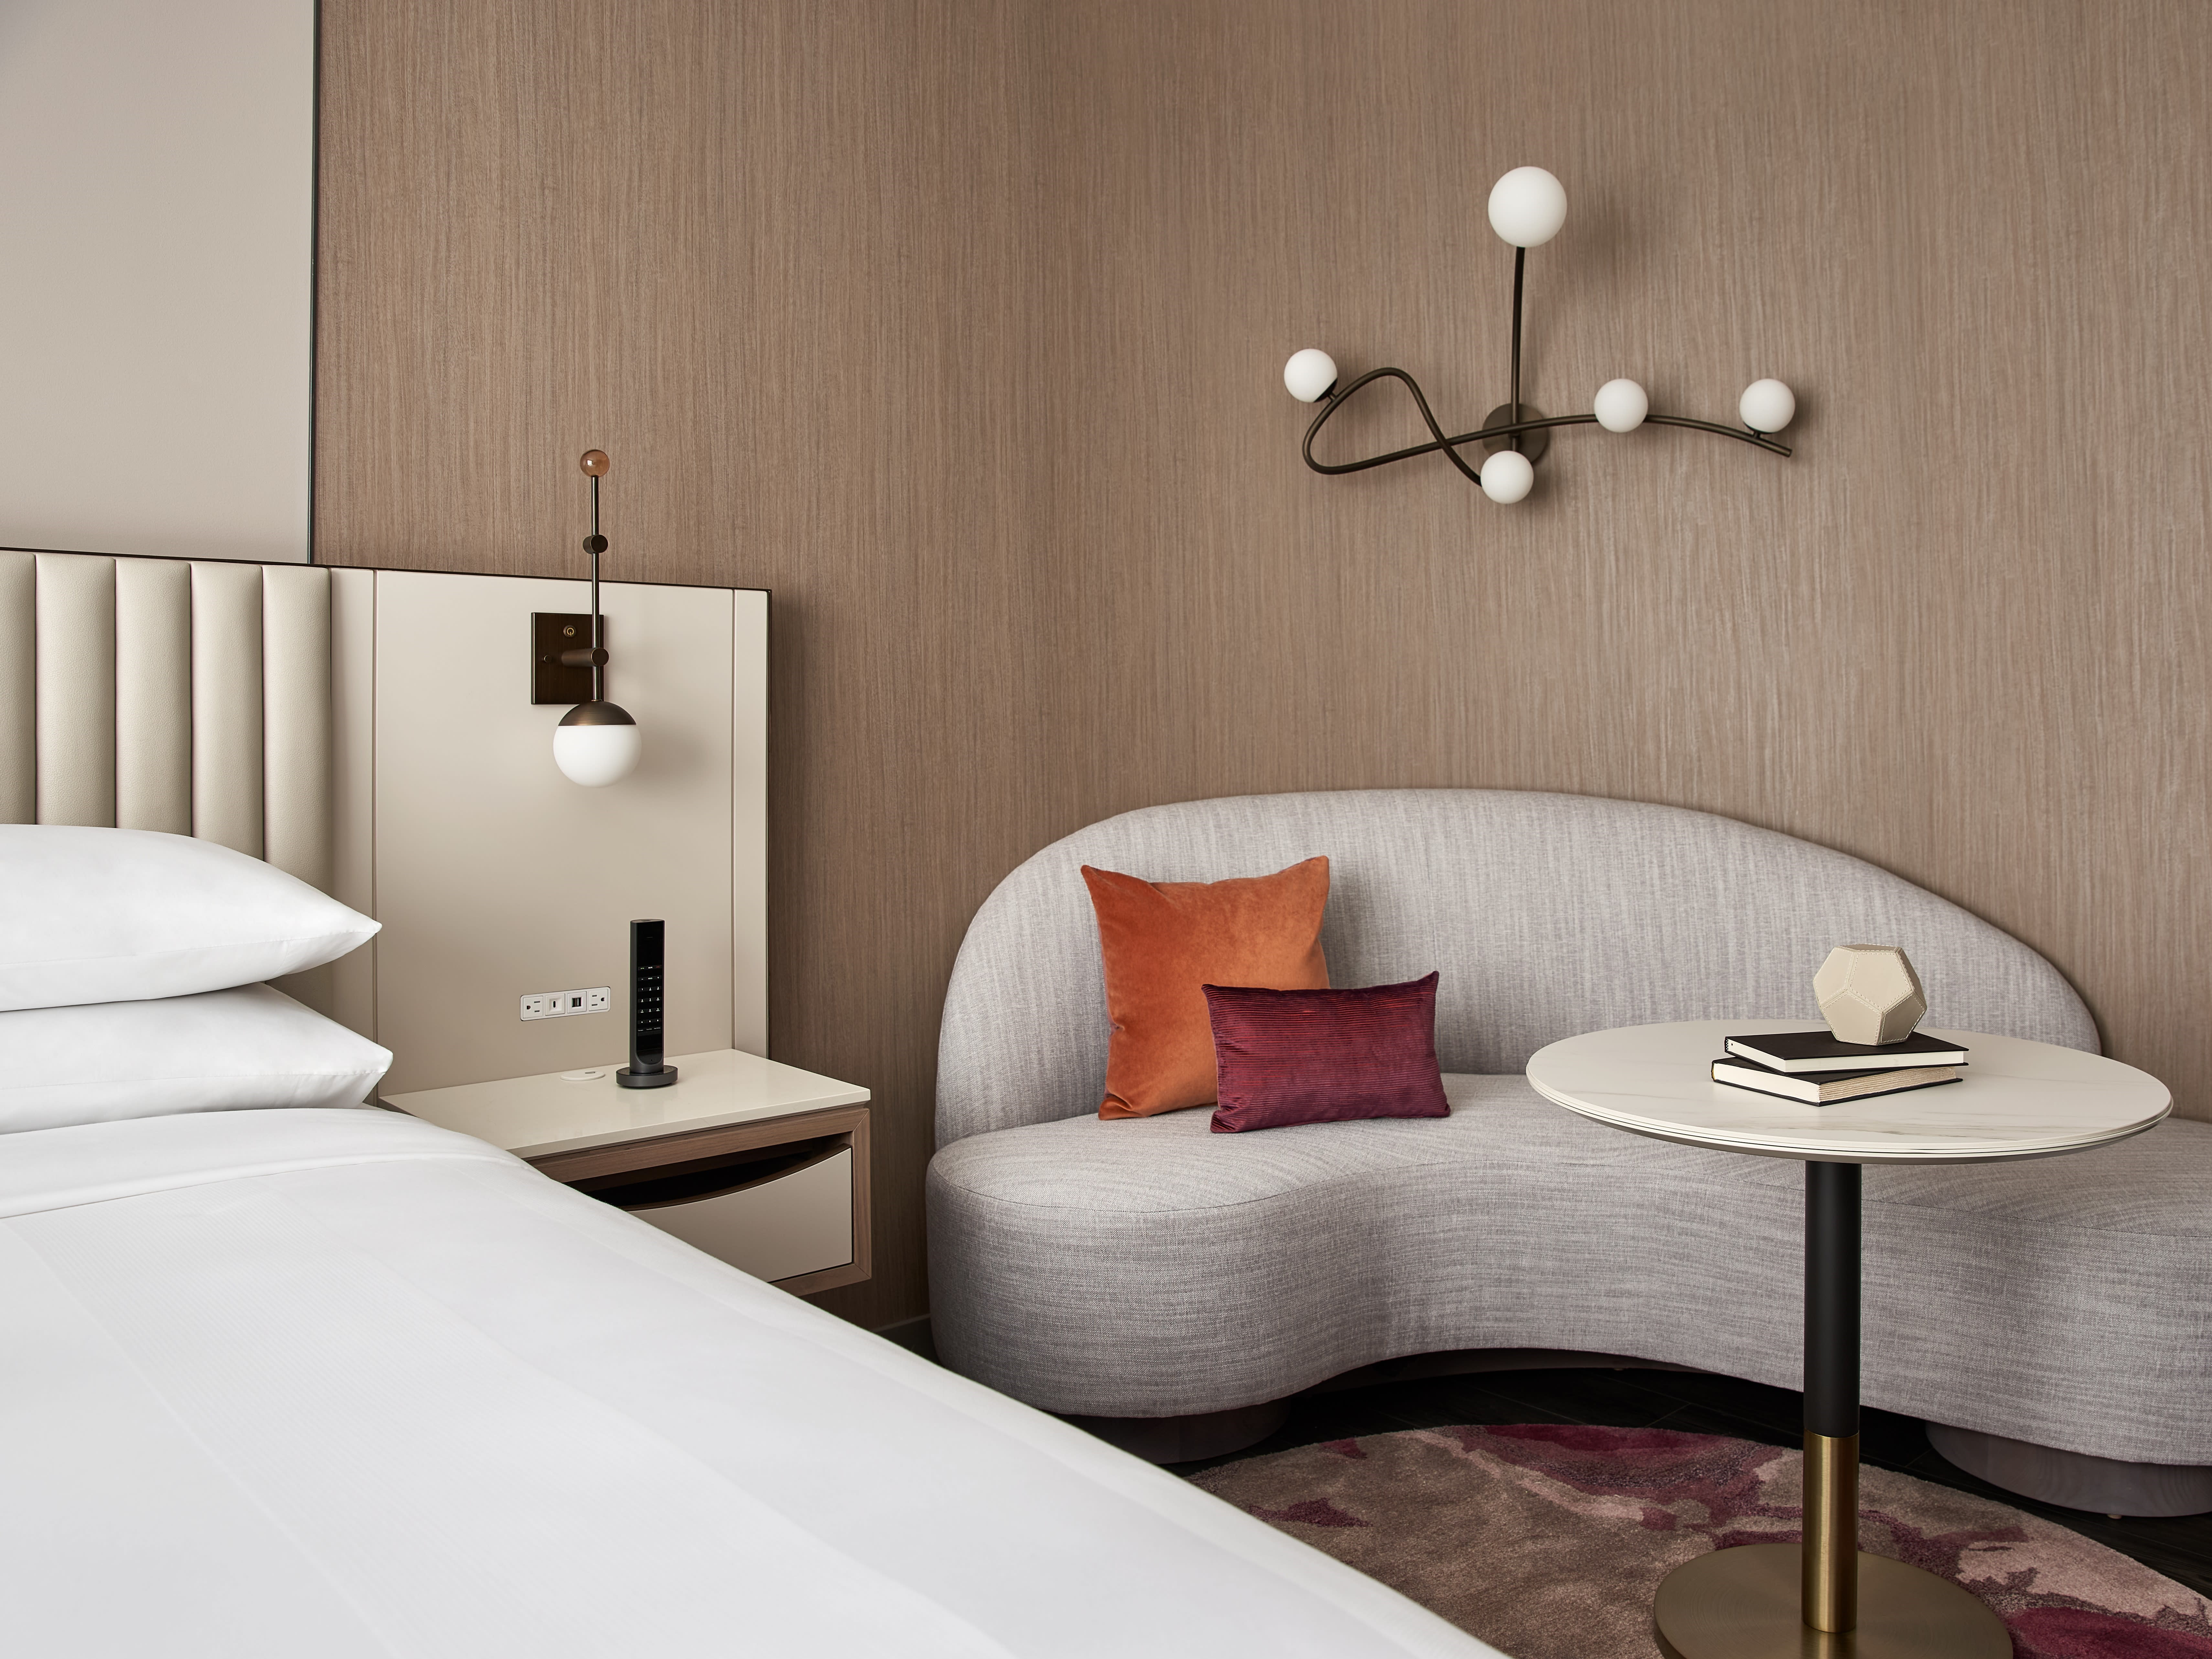 Creating Space: Small Hotel Room Design Is on the Rise